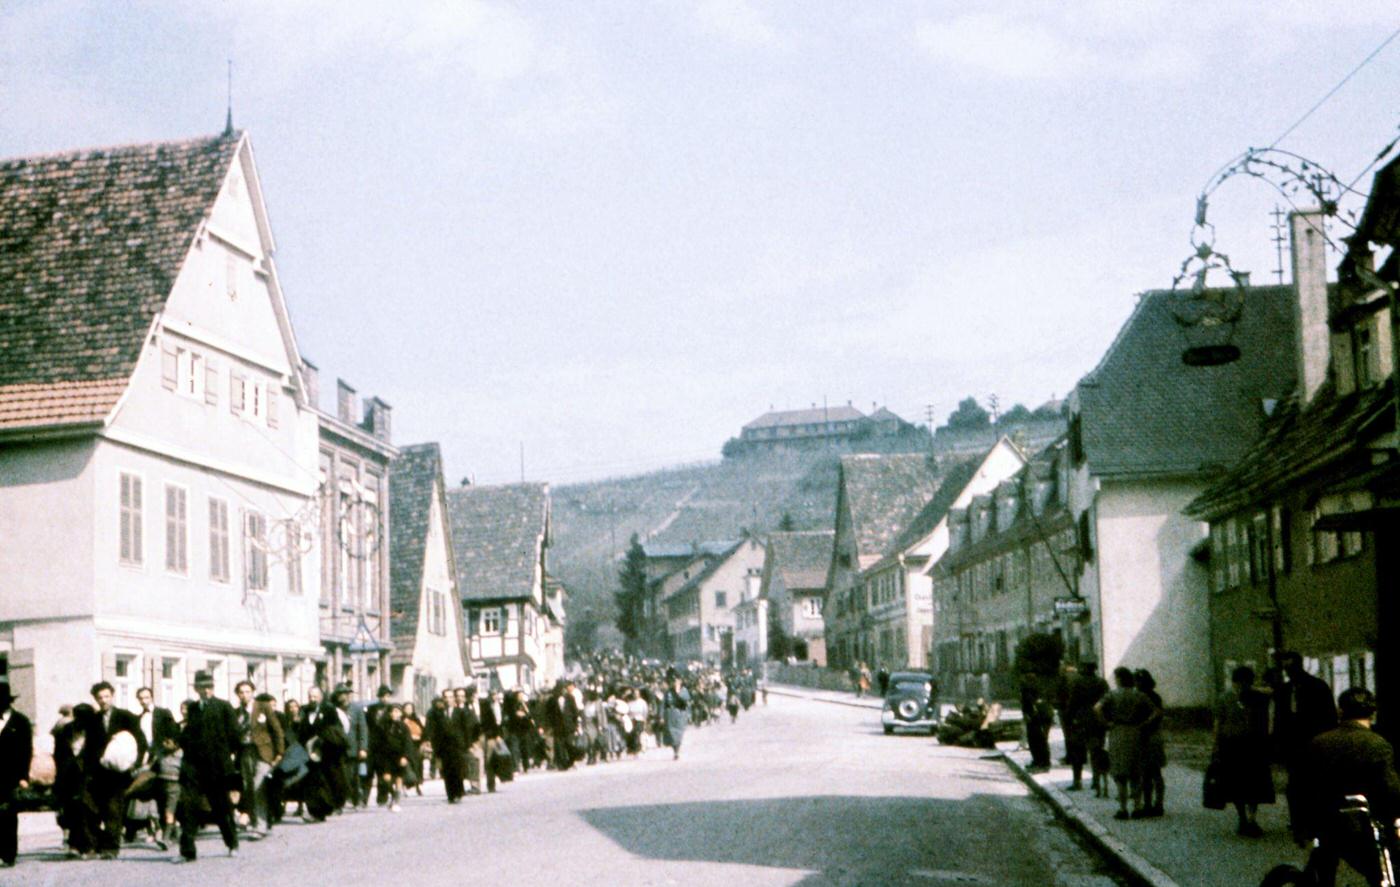 Sinti under police surveillance marching in Asperg before being locked up at Hohenasperg prison prior to deportation to camps in Poland, May 22, 1940.